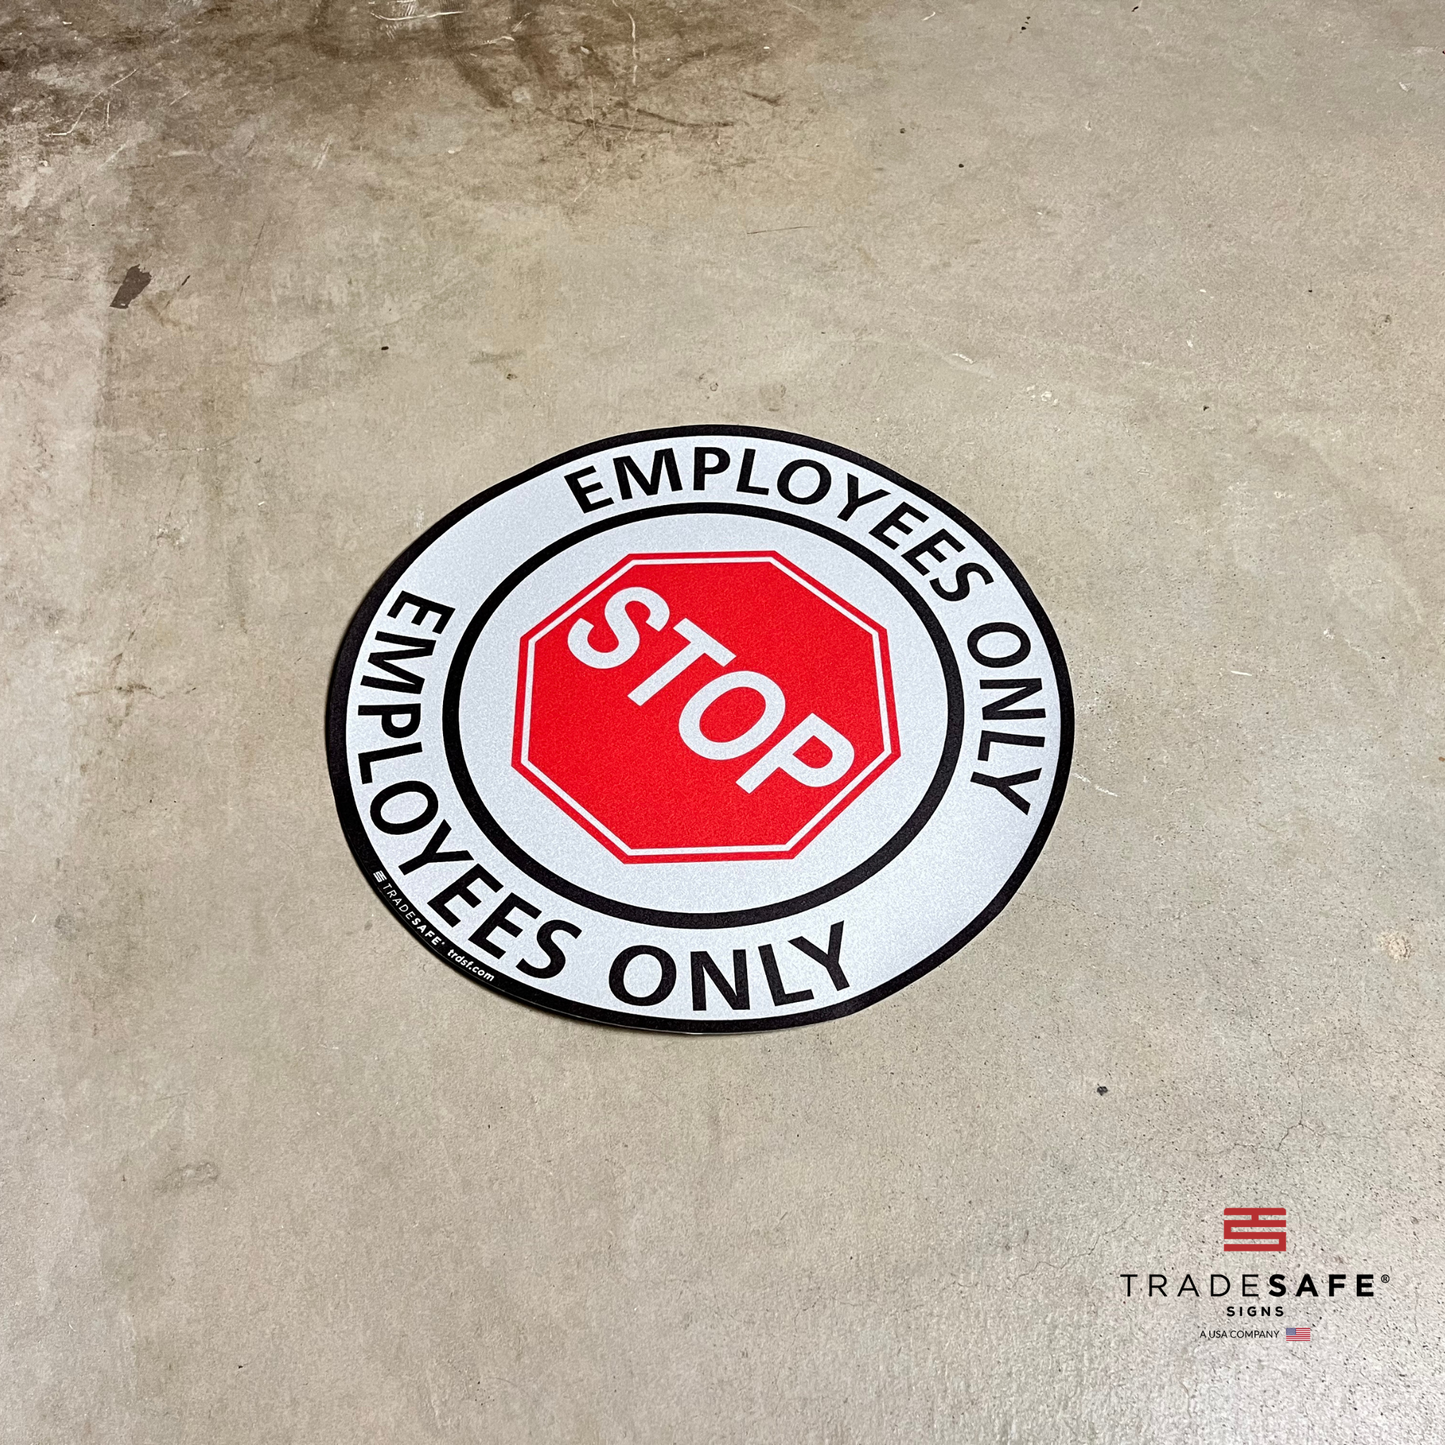 employees only sign on floor